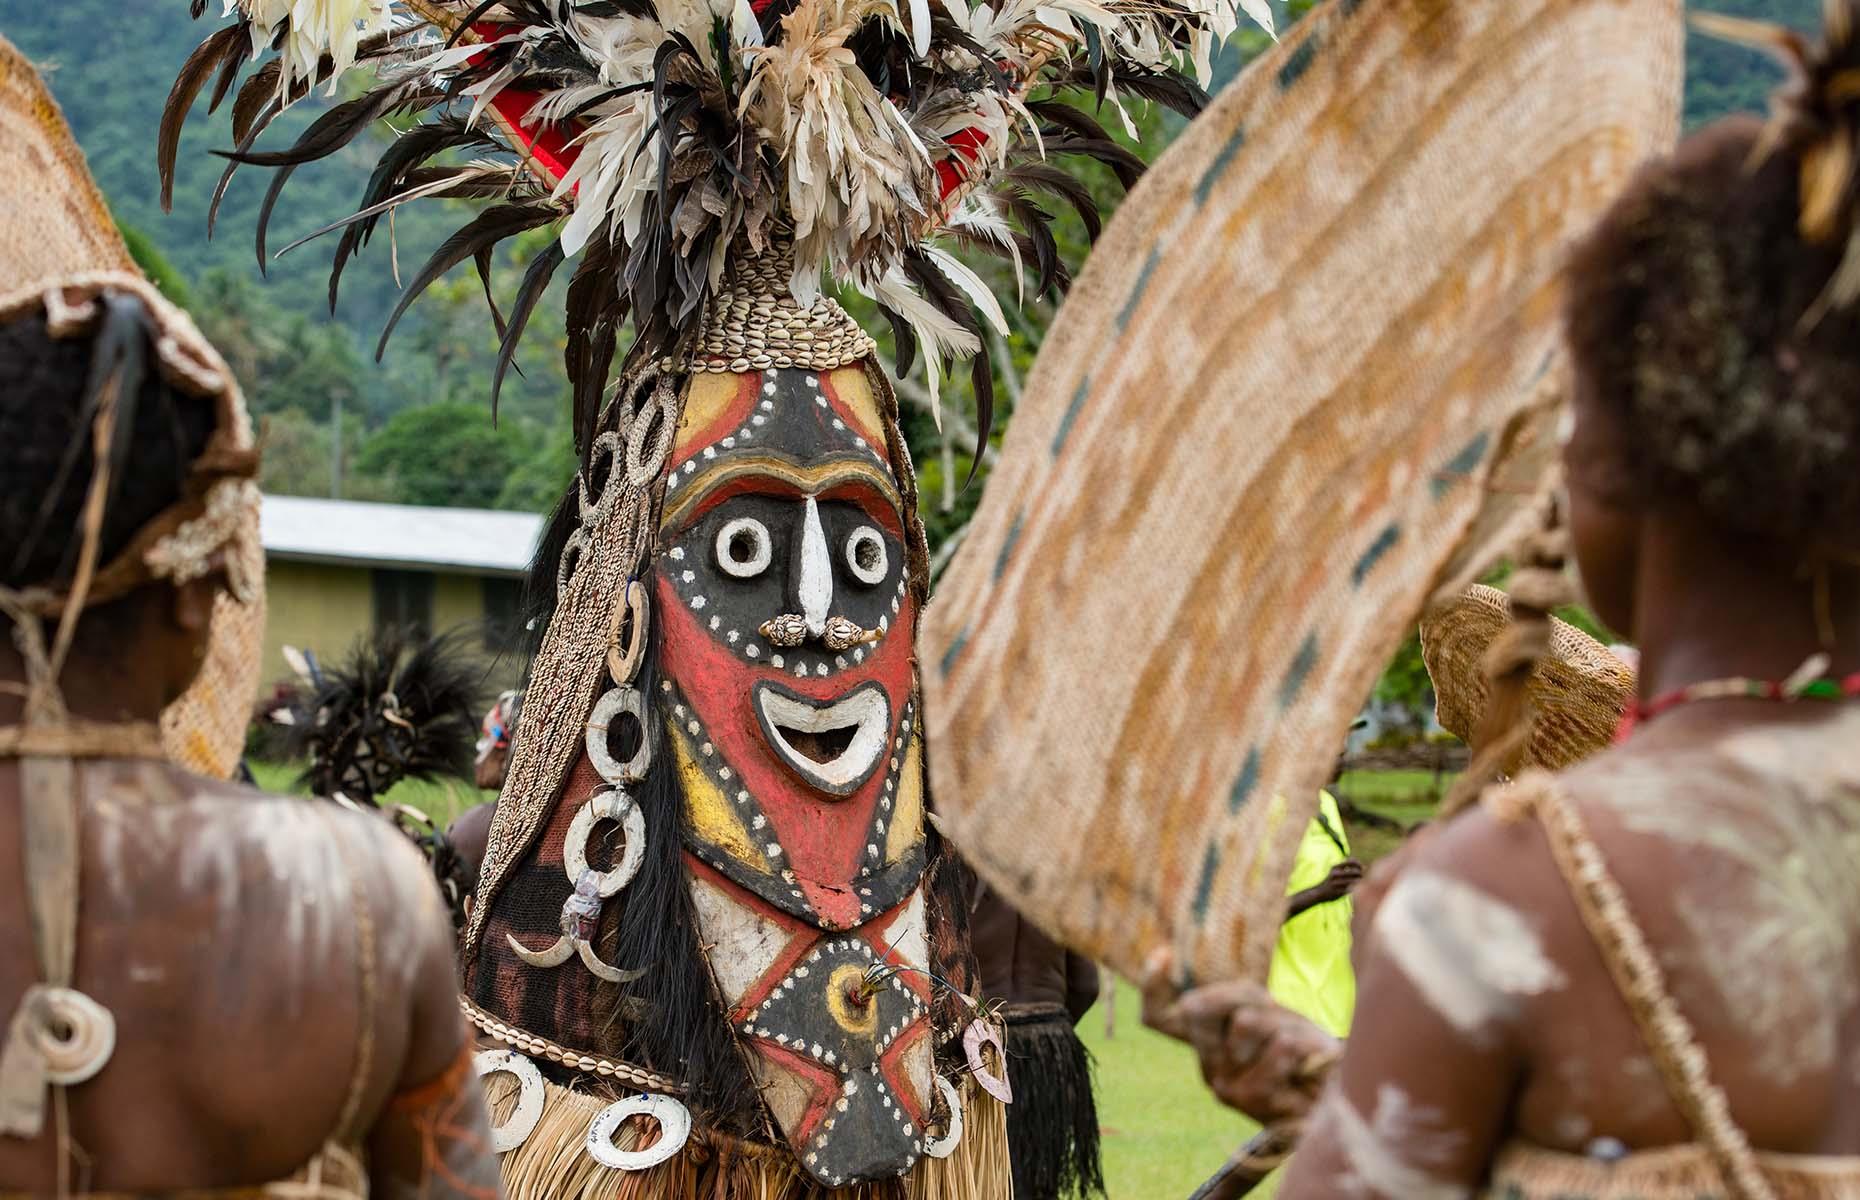 <p>It might be one nation now, but the islands of Papua New Guinea are made up of hundreds of distinct communities, cultures and customs. More than 800 languages are spoken across the country and key cultural highlights include the Sepik Crocodile Festival (pictured), paying tribute to the fresh and saltwater crocs that roam these waters; and the Enga Cultural Festival, which seeks to preserve the little-known Enga way of life. Look out for wildlife too, with 38 species of birds of paradise and the world’s smallest parrot.</p>